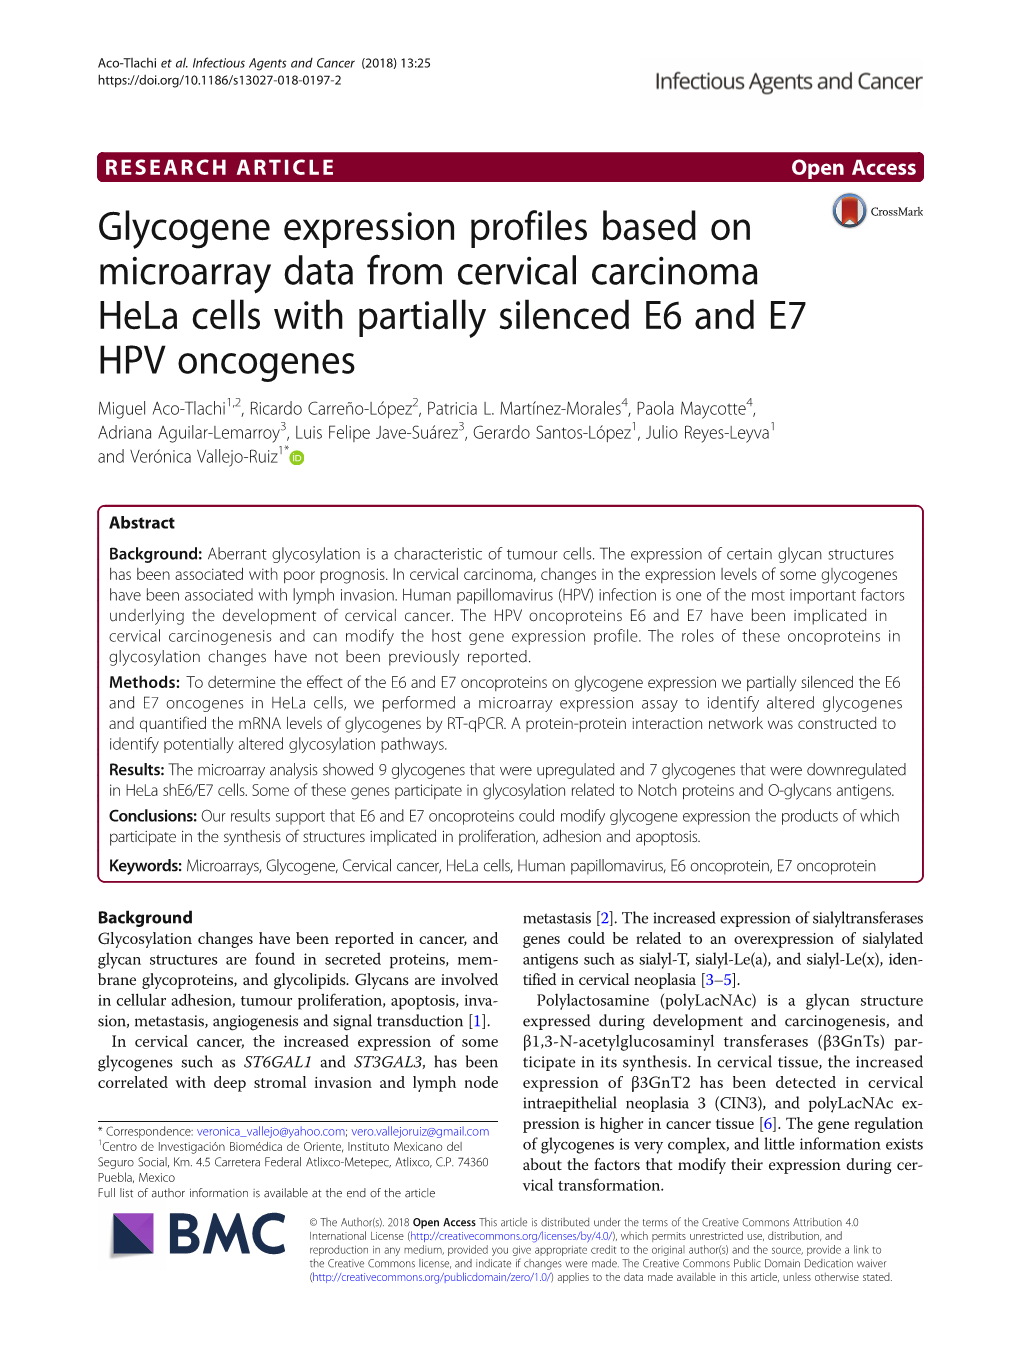 Glycogene Expression Profiles Based on Microarray Data from Cervical